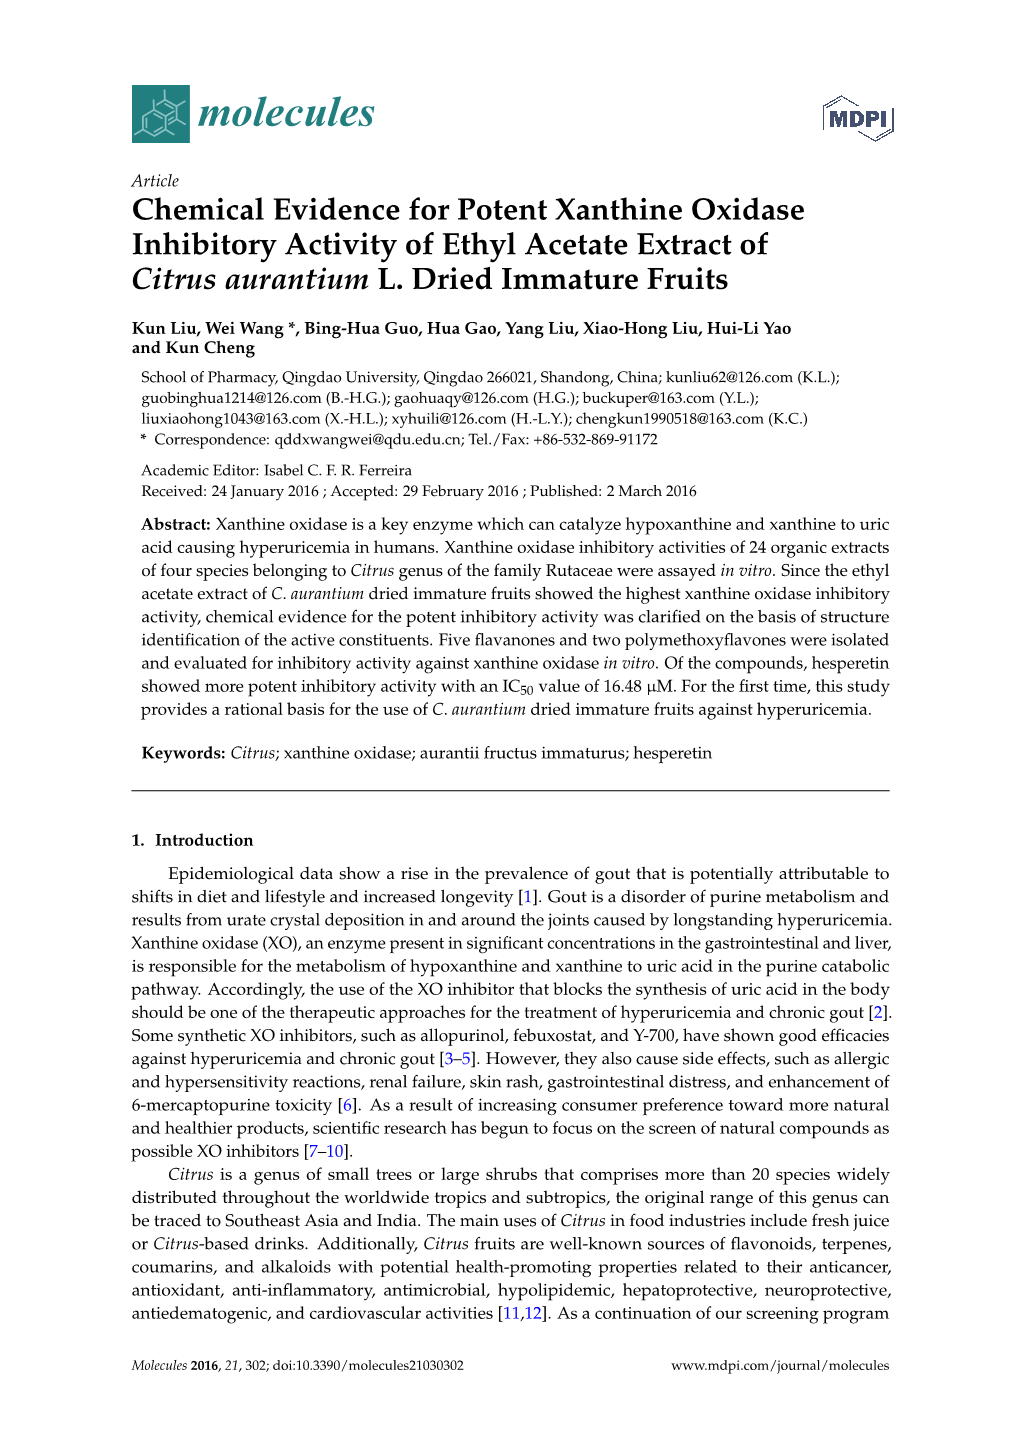 Chemical Evidence for Potent Xanthine Oxidase Inhibitory Activity of Ethyl Acetate Extract of Citrus Aurantium L